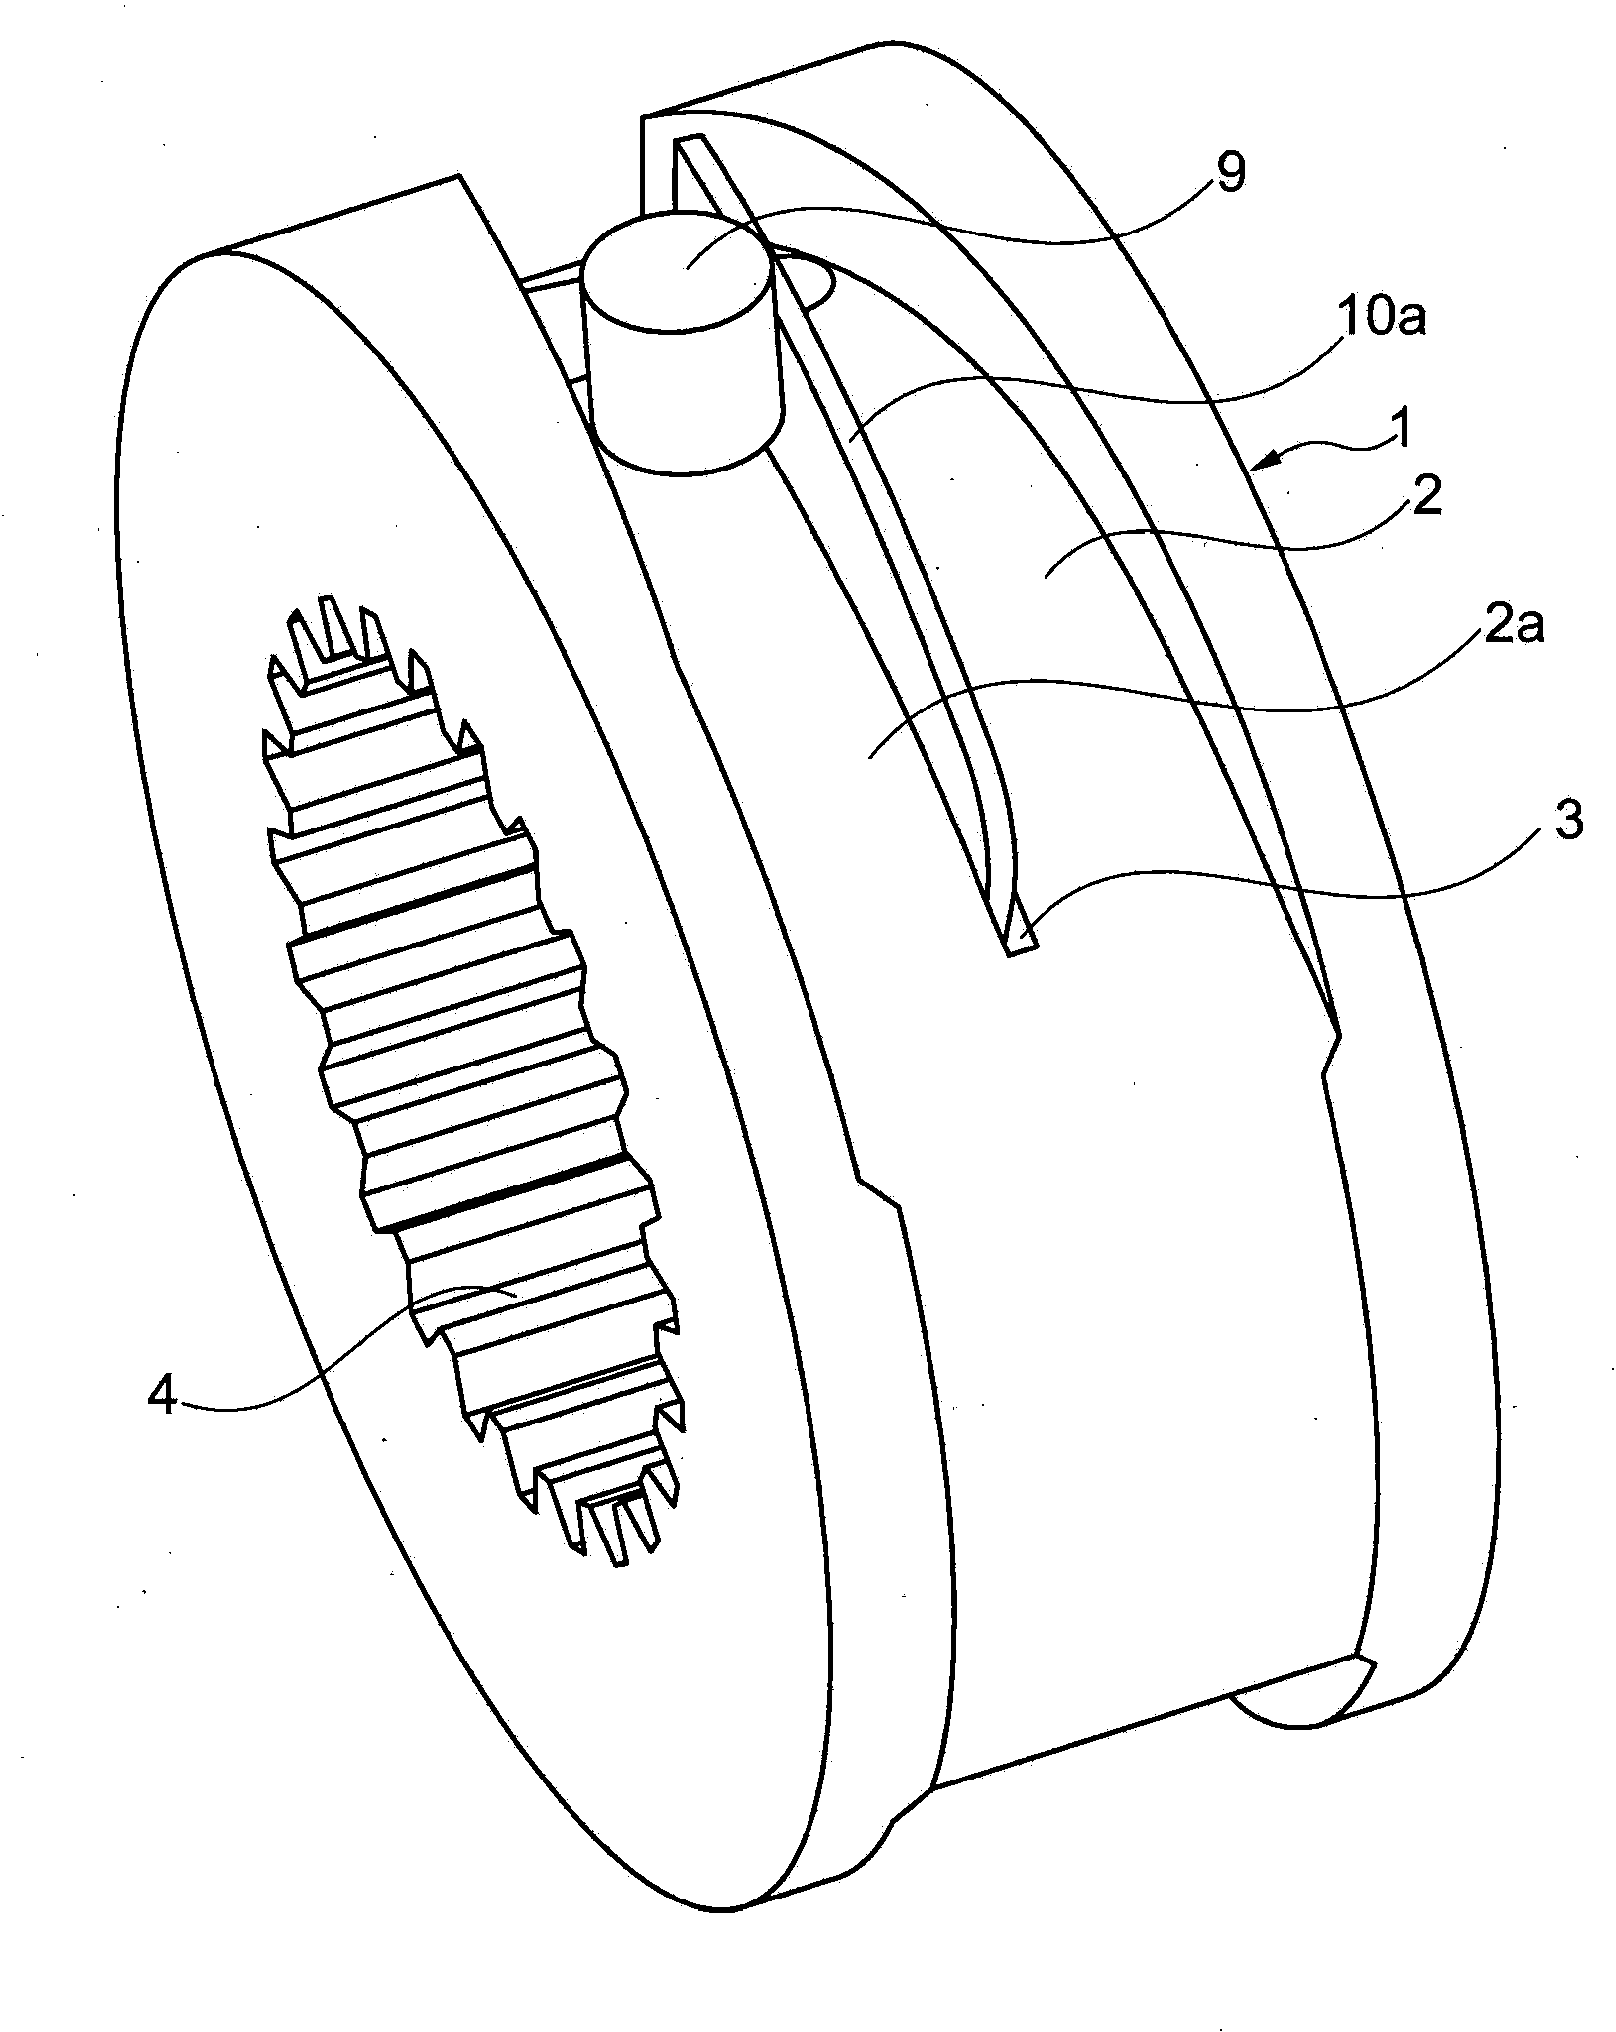 Sliding cam system of reciprocating piston internal combustion engine with sliding grooves and guide elements arranged in x-shape